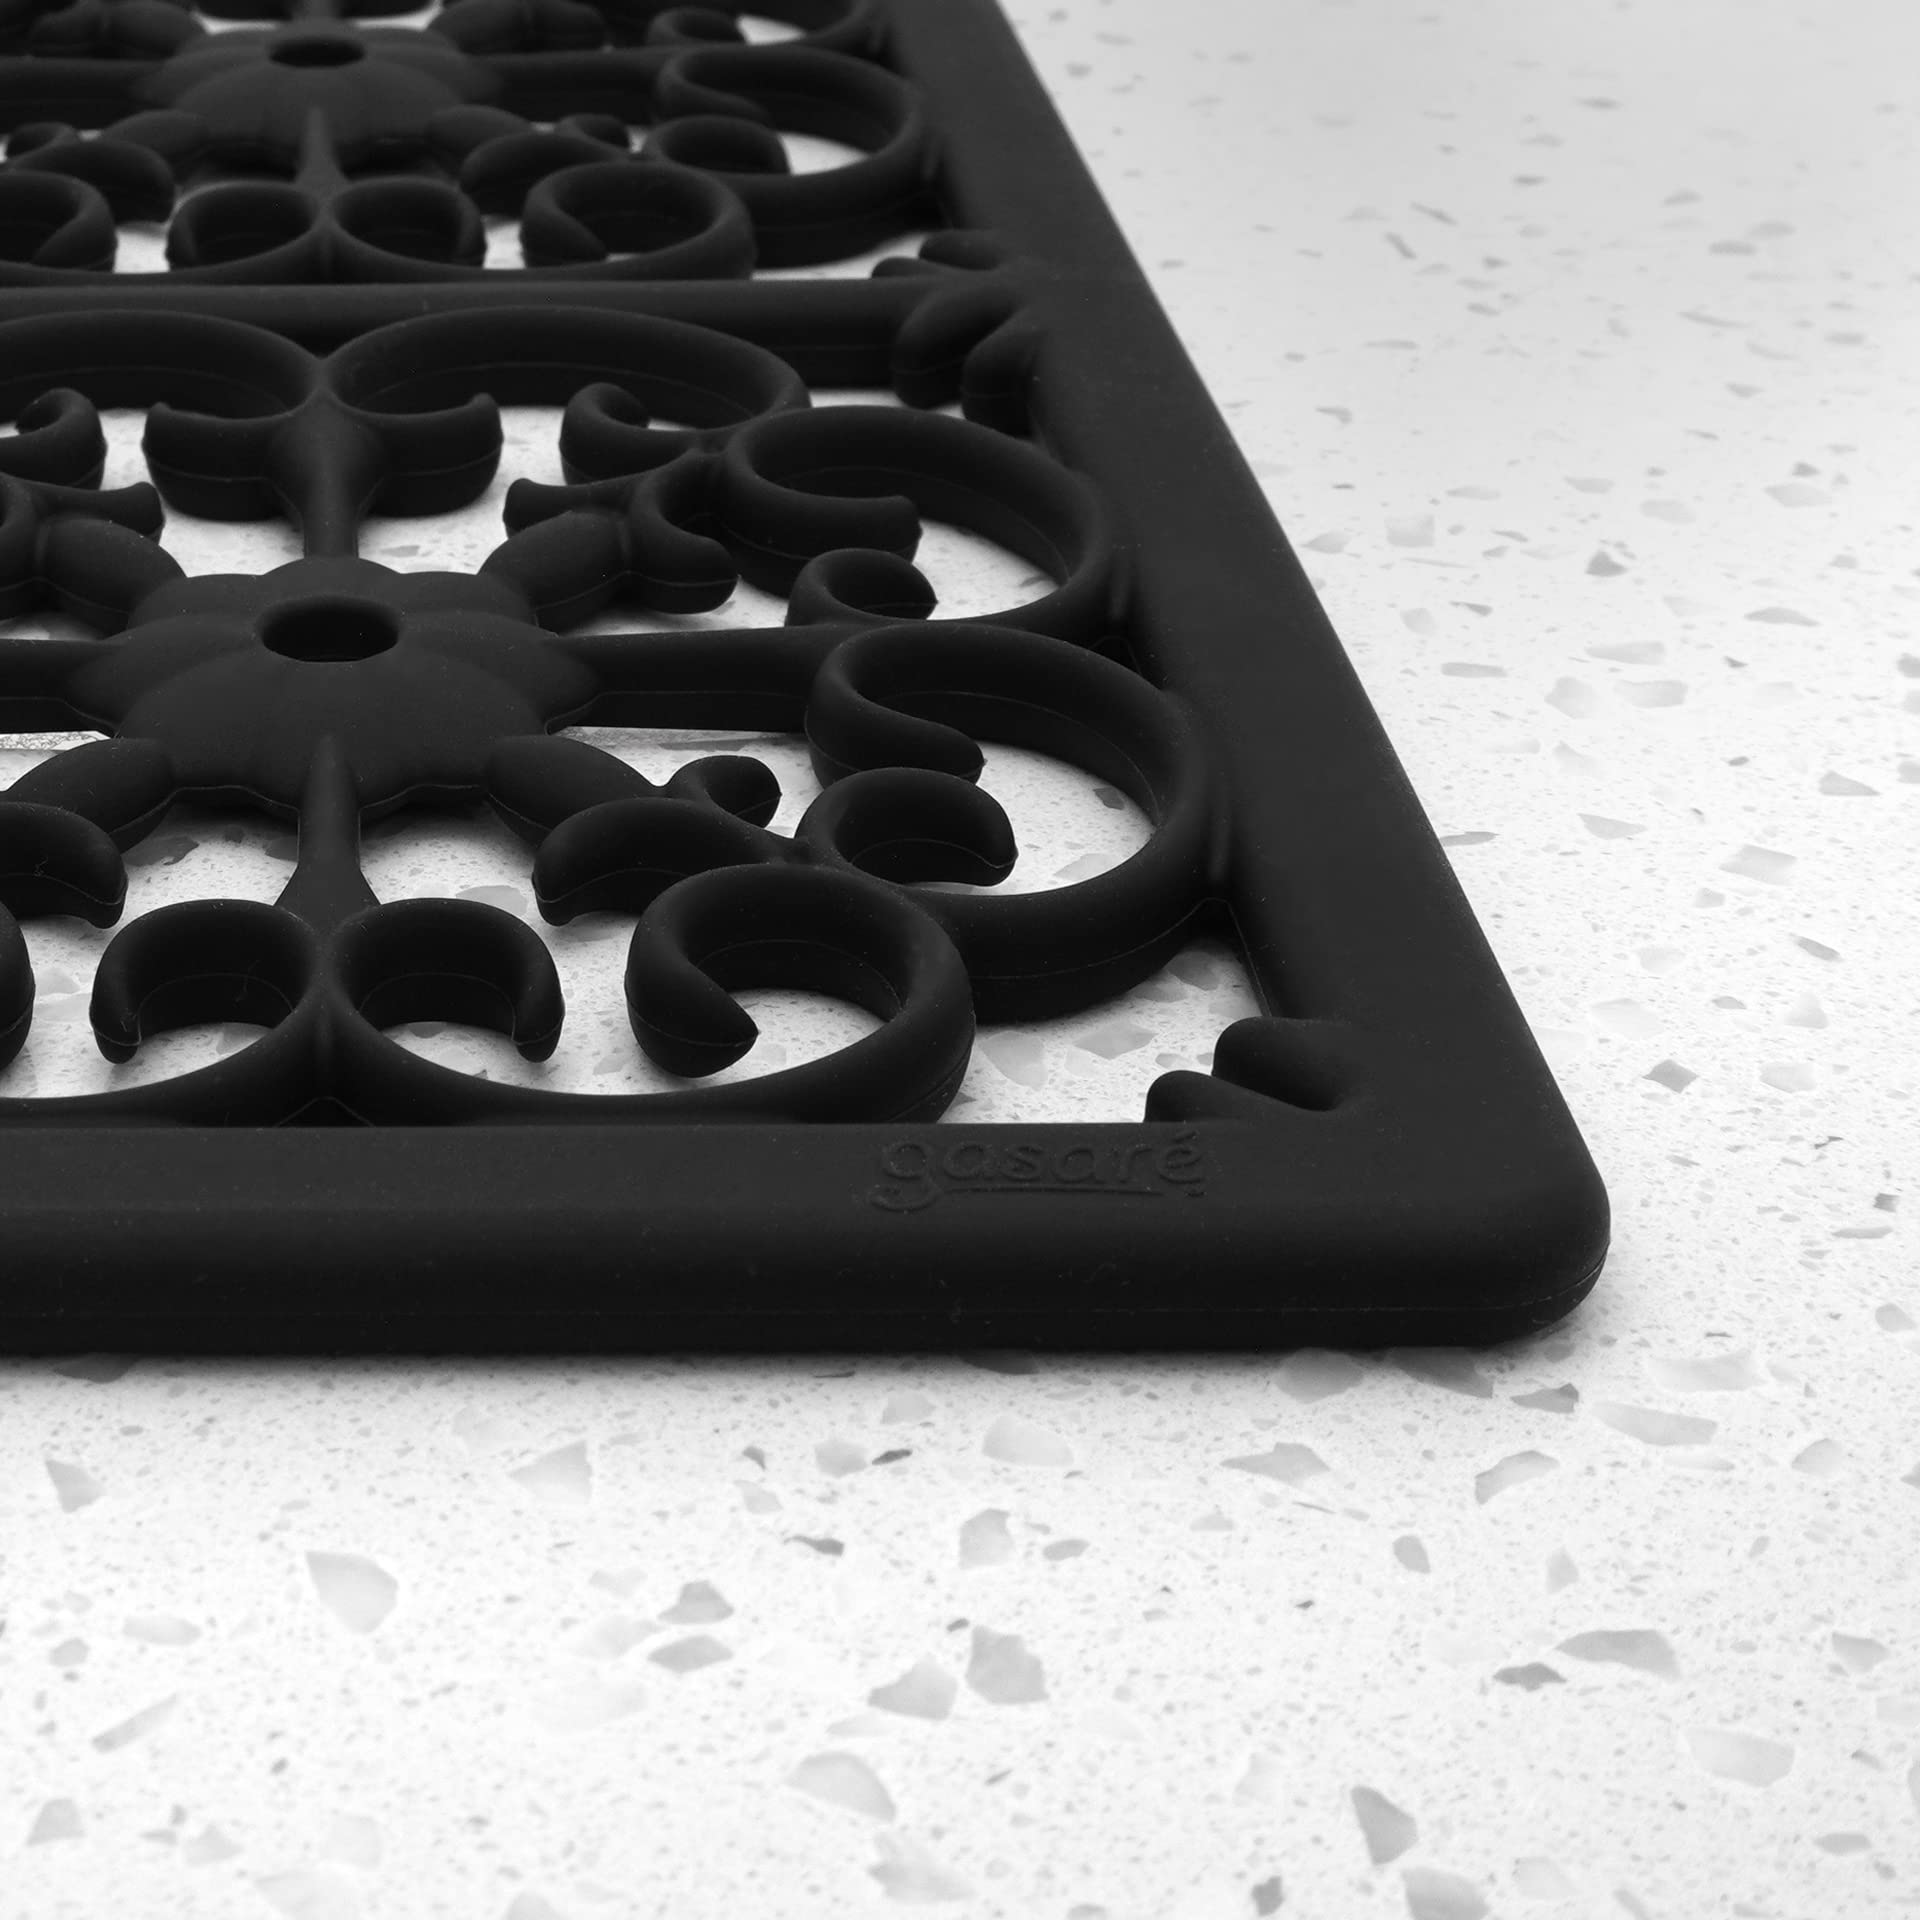 gasaré, Extra Large, Thick, Silicone Trivet for Hot Pots, Pans, Dishes, and Bakeware, Hot Pads, Hot Plates, for Kitchen Quartz Countertops, Dishwasher Safe, 16 x 12 x 3/8 Inches, Black